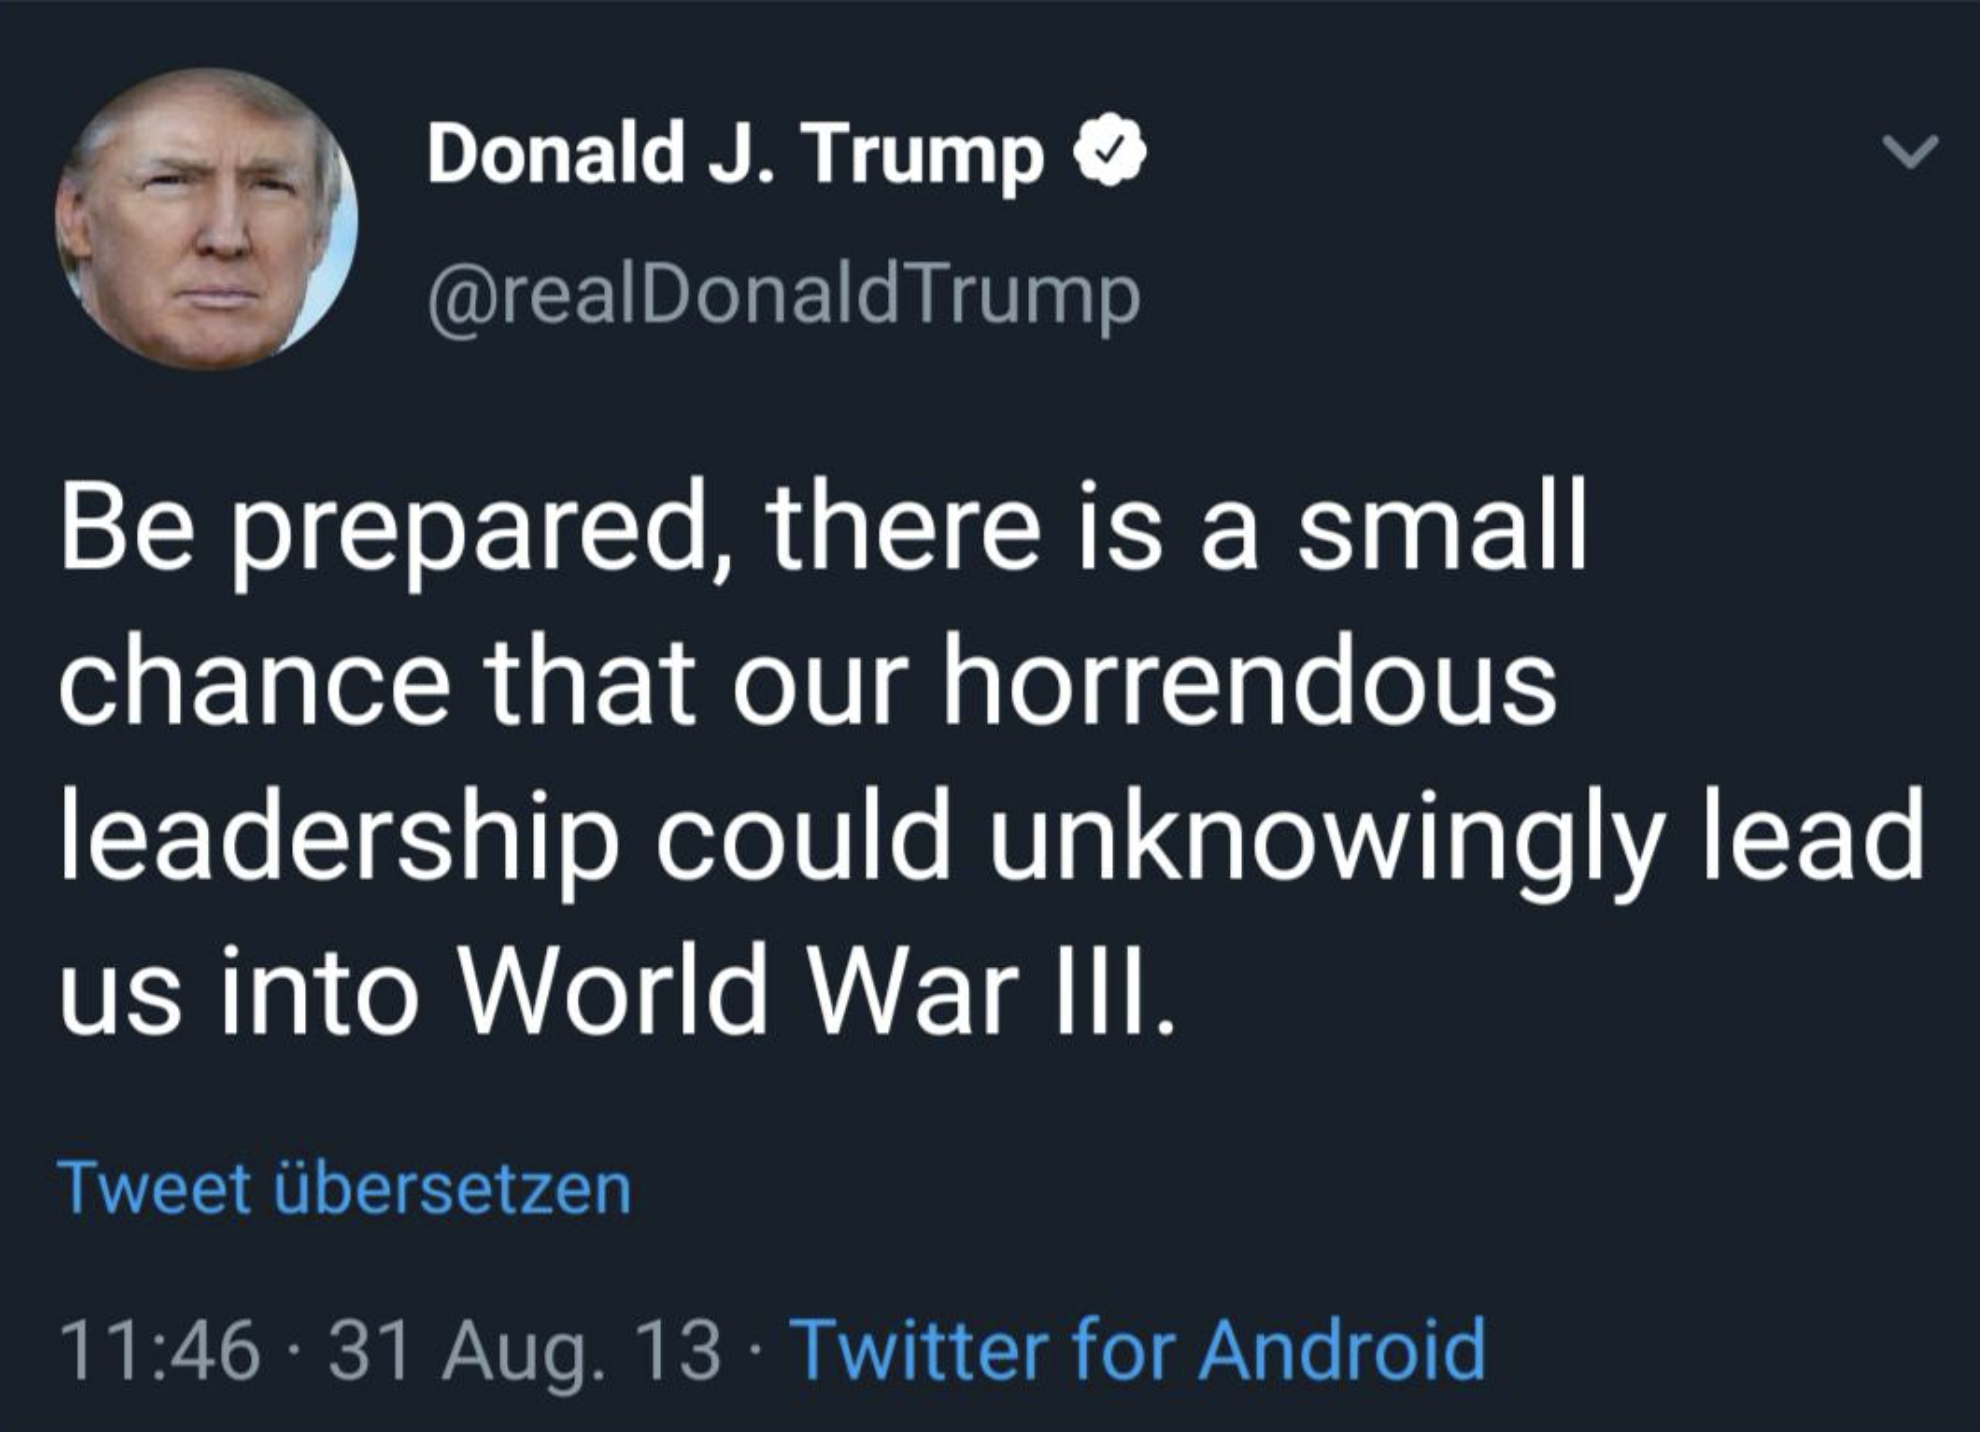 screenshot - Donald J. Trump Be prepared, there is a small chance that our horrendous leadership could unknowingly lead us into World War Iii. Tweet bersetzen 31 Aug. 13 Twitter for Android